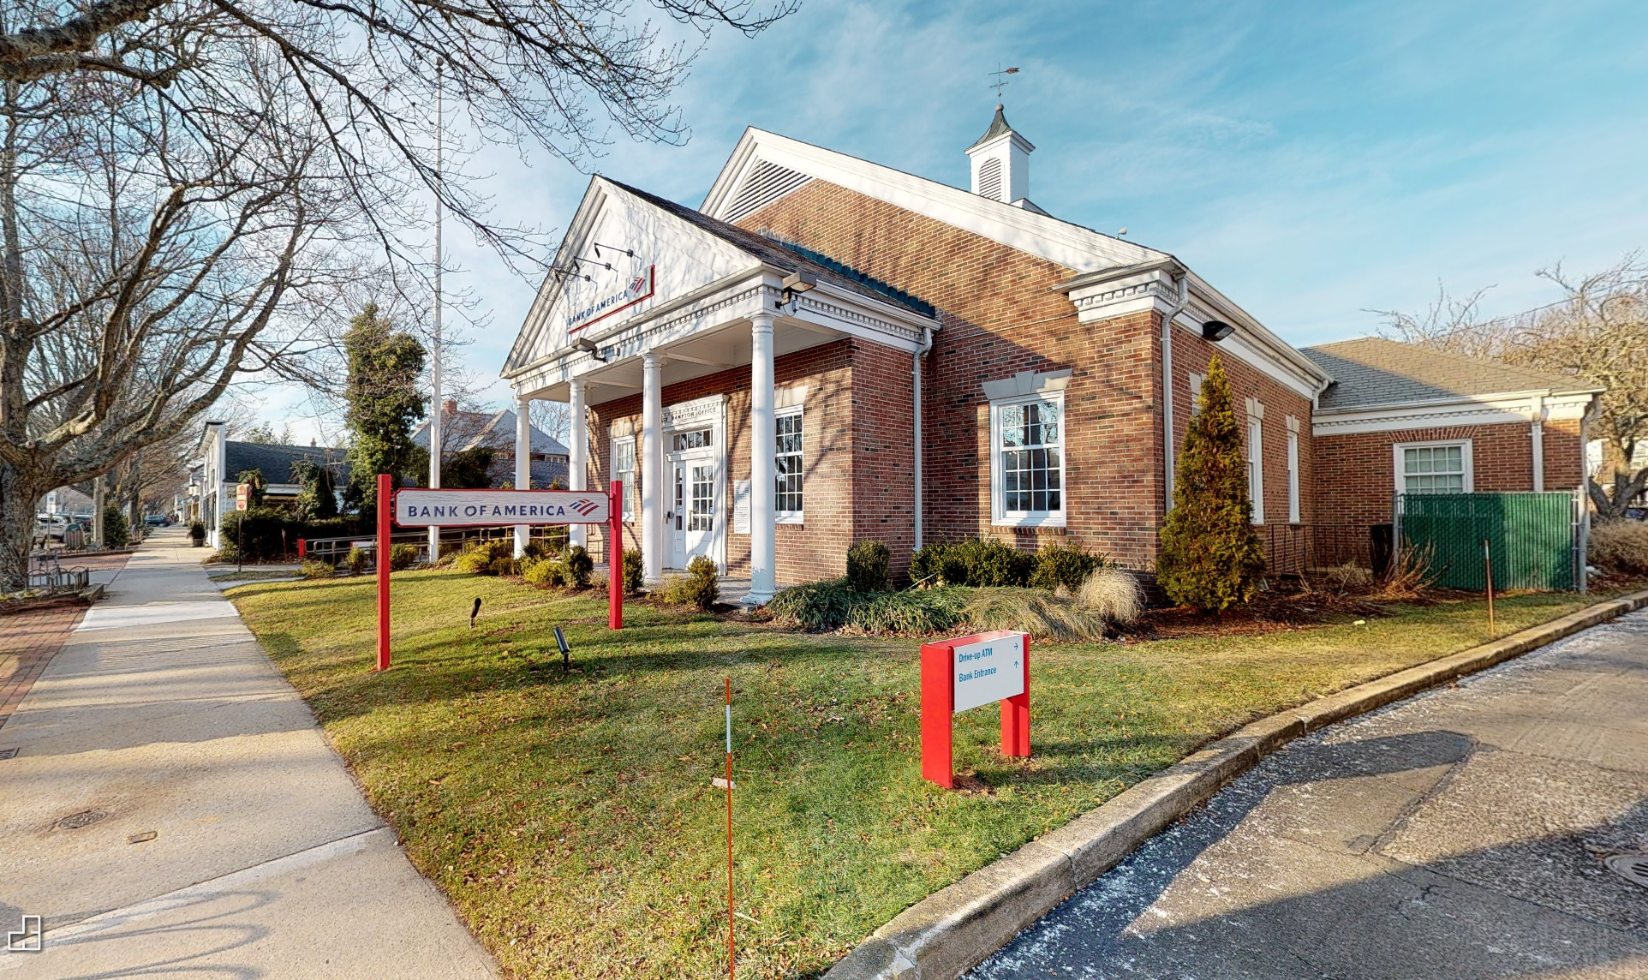 Bank of America financial center with drive-thru ATM and teller | 14 Newtown Ln, East Hampton, NY 11937